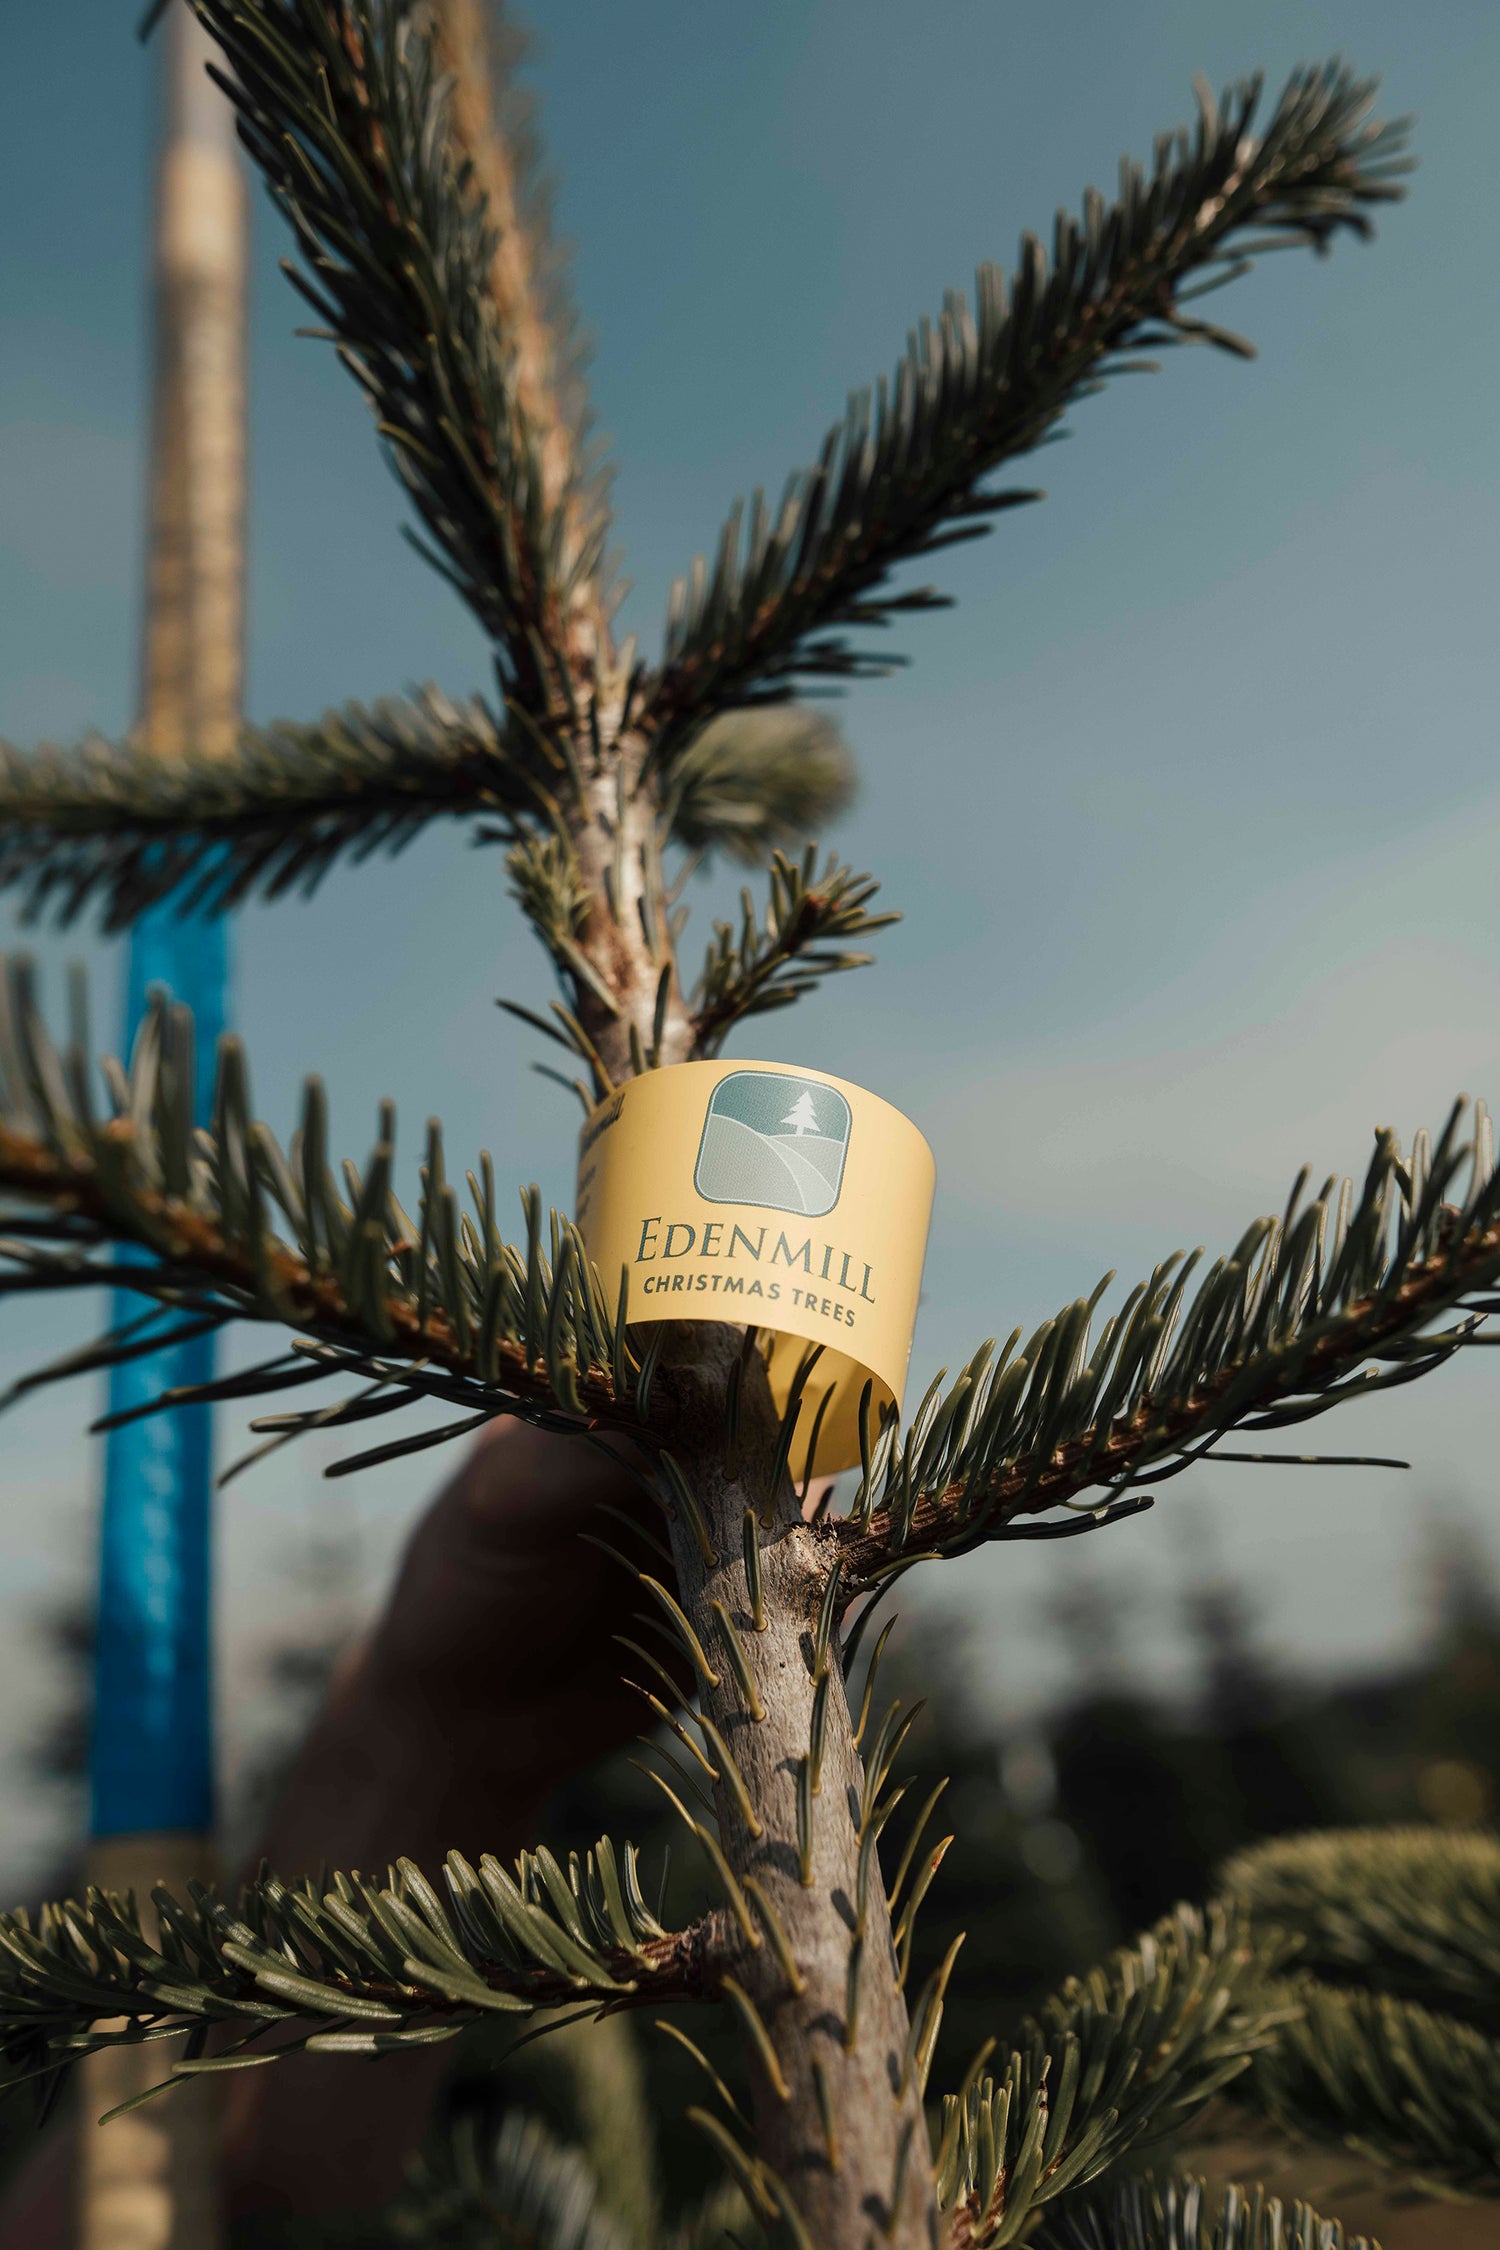 A label on a fresh Edenmill Christmas Tree